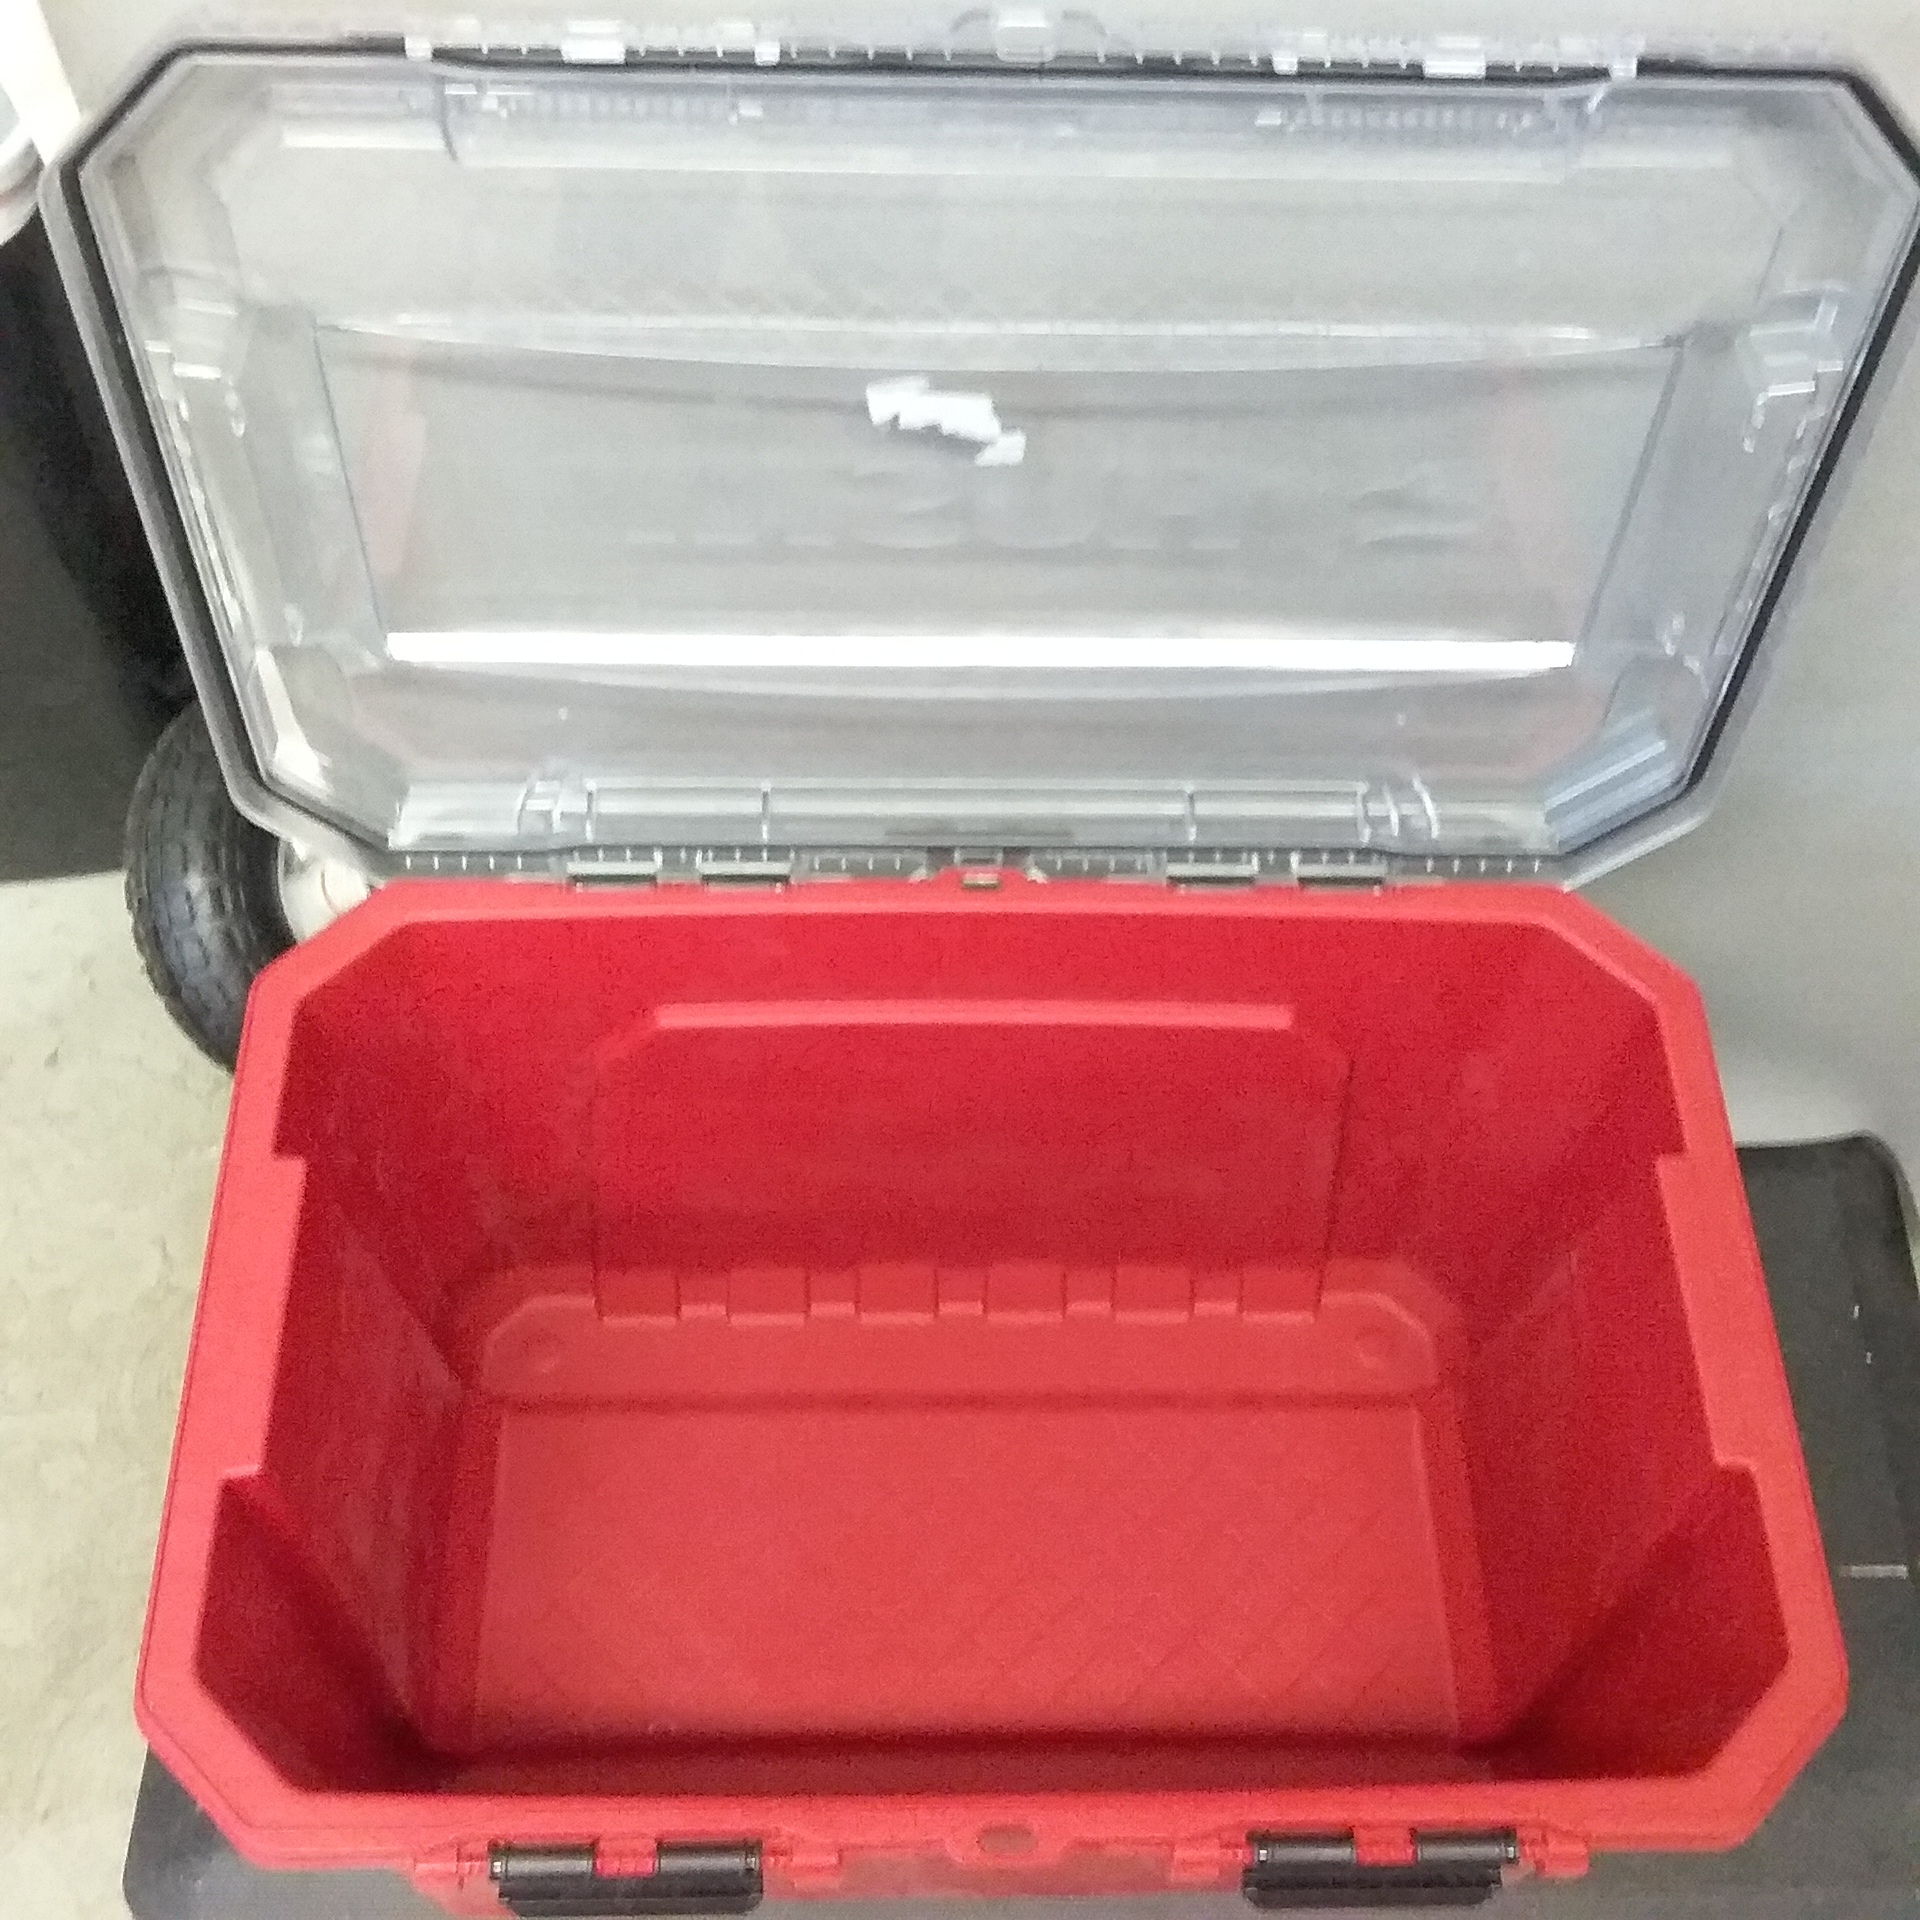 1) Husky 30 gal professional duty waterproof storage container with hinged  lid - Matthews Auctioneers